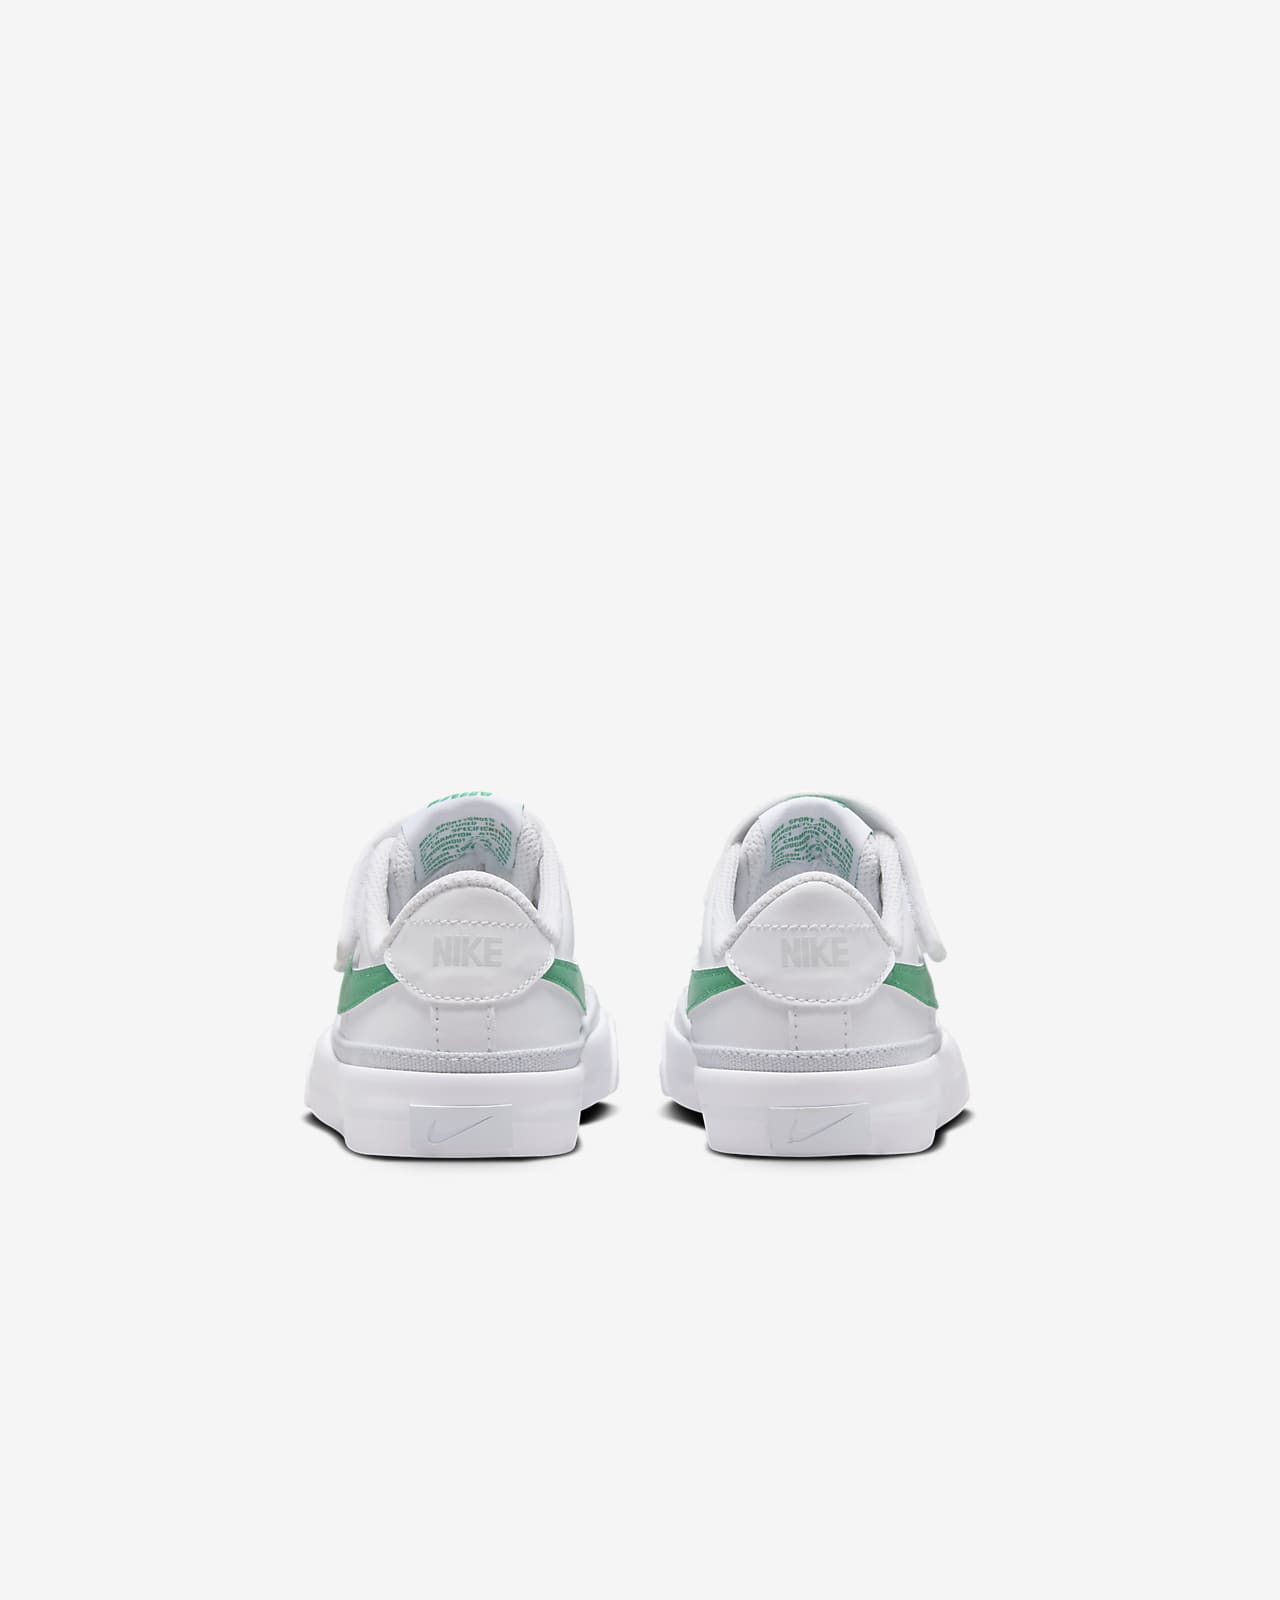 Nike Court Legacy Little Shoes. Kids